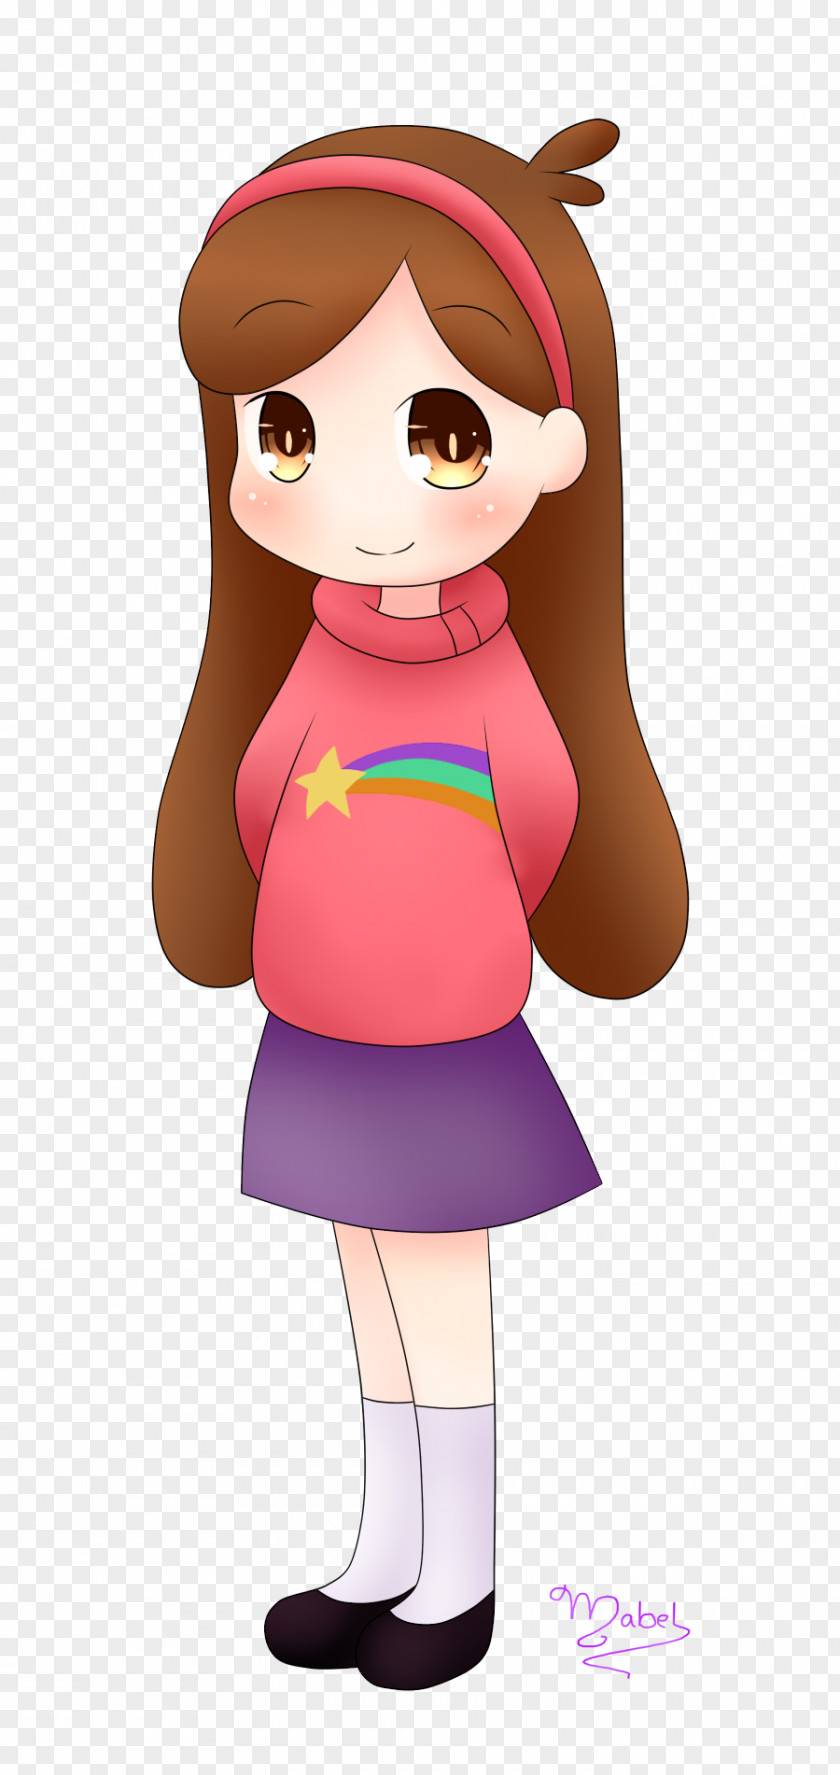 Mabel Gravity Falls Pines Robbie Dipper And Vs The Future DeviantArt PNG